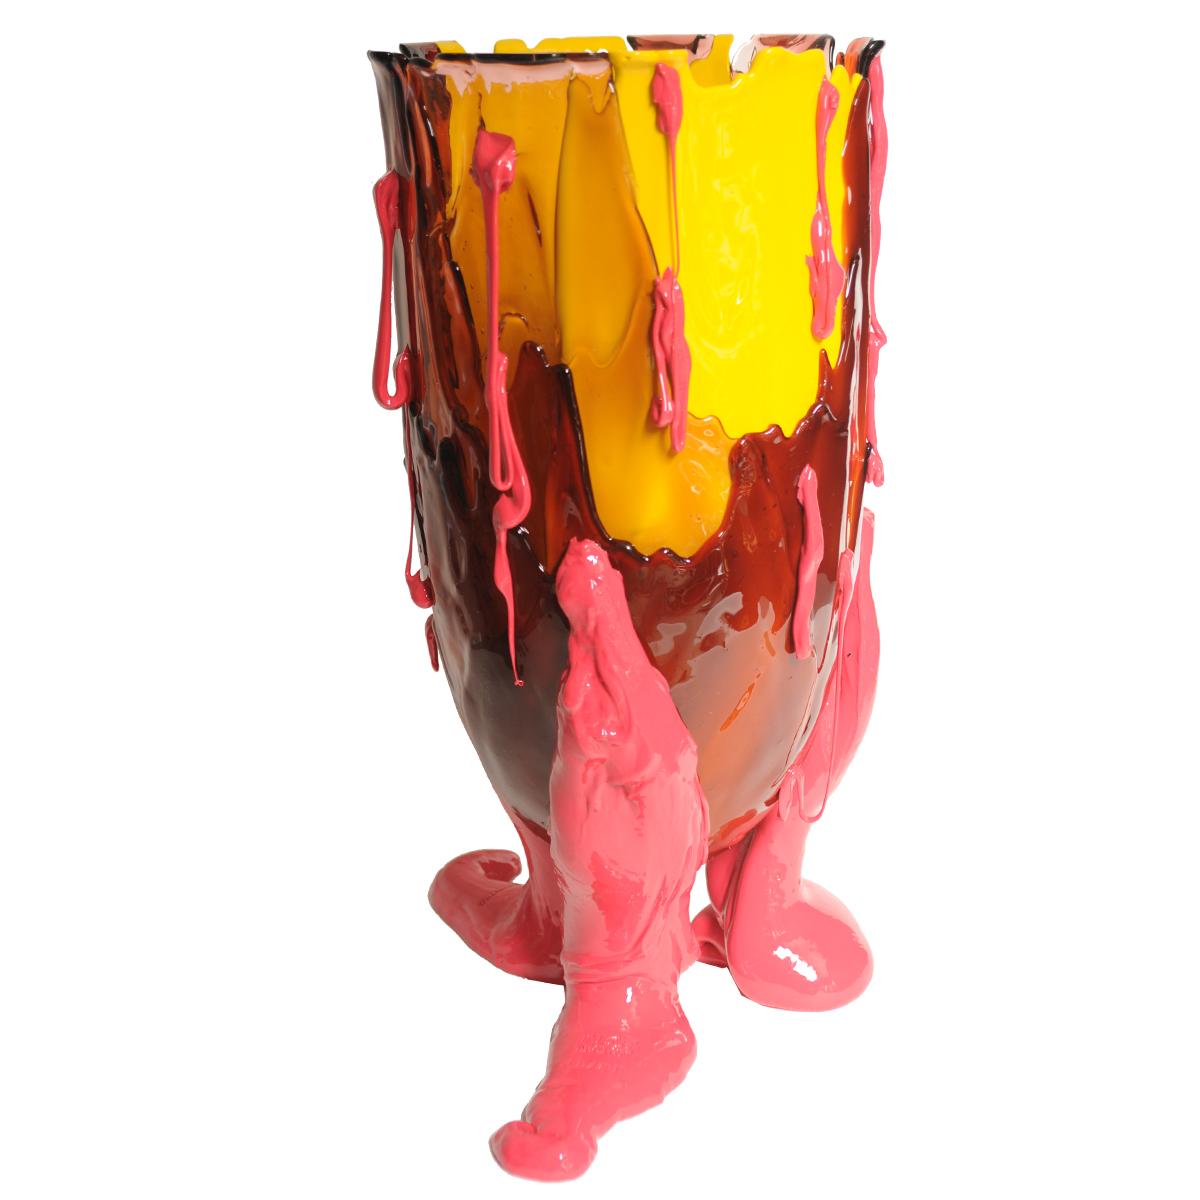 Gaetano Pesce Clear Special XL Vase Resin Yellow, Ruby, Pink, Fuchsia In New Condition For Sale In barasso, IT